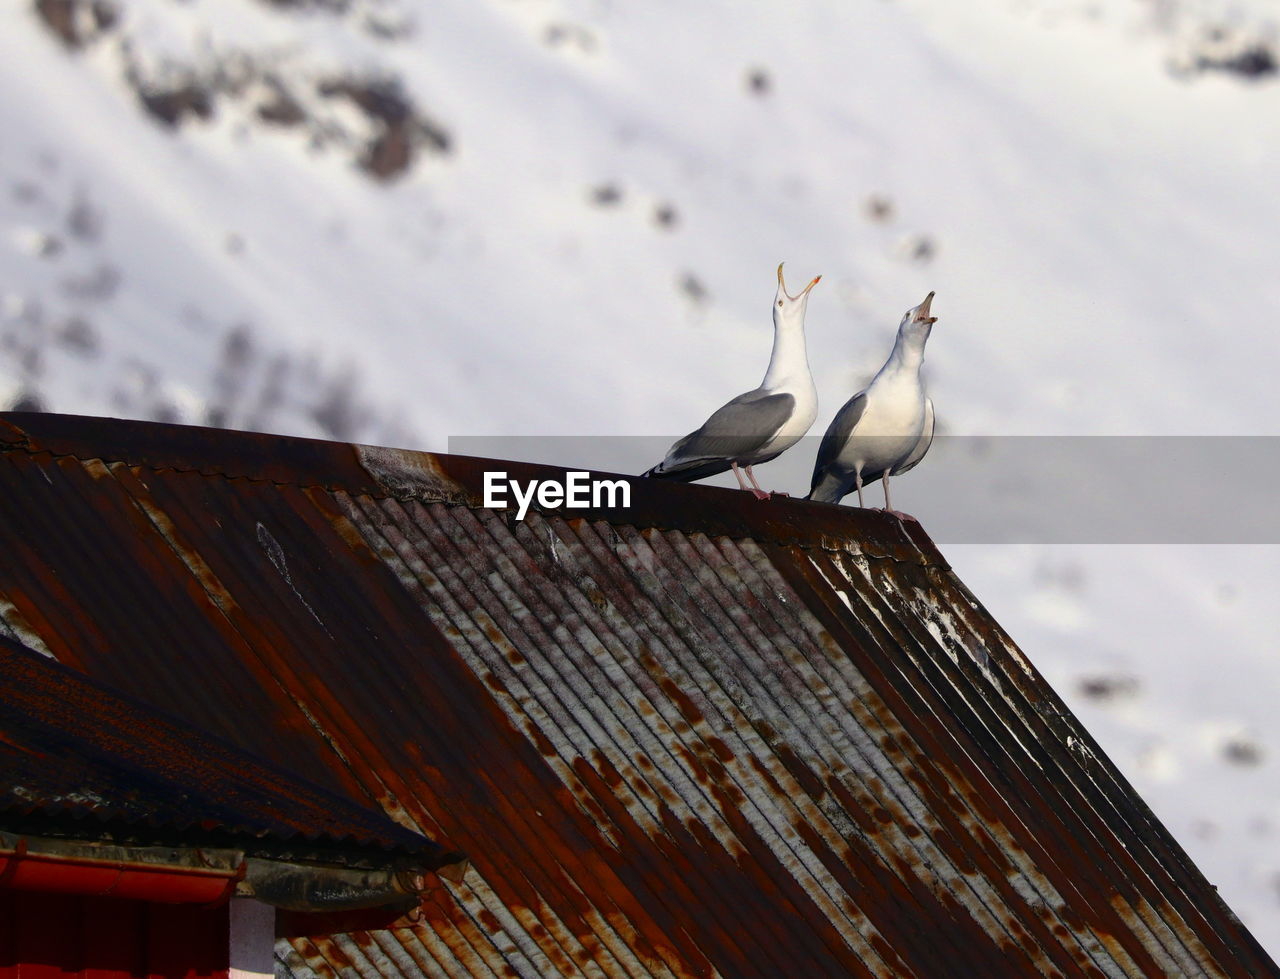 LOW ANGLE VIEW OF SEAGULLS PERCHING ON ROOF AGAINST SNOW